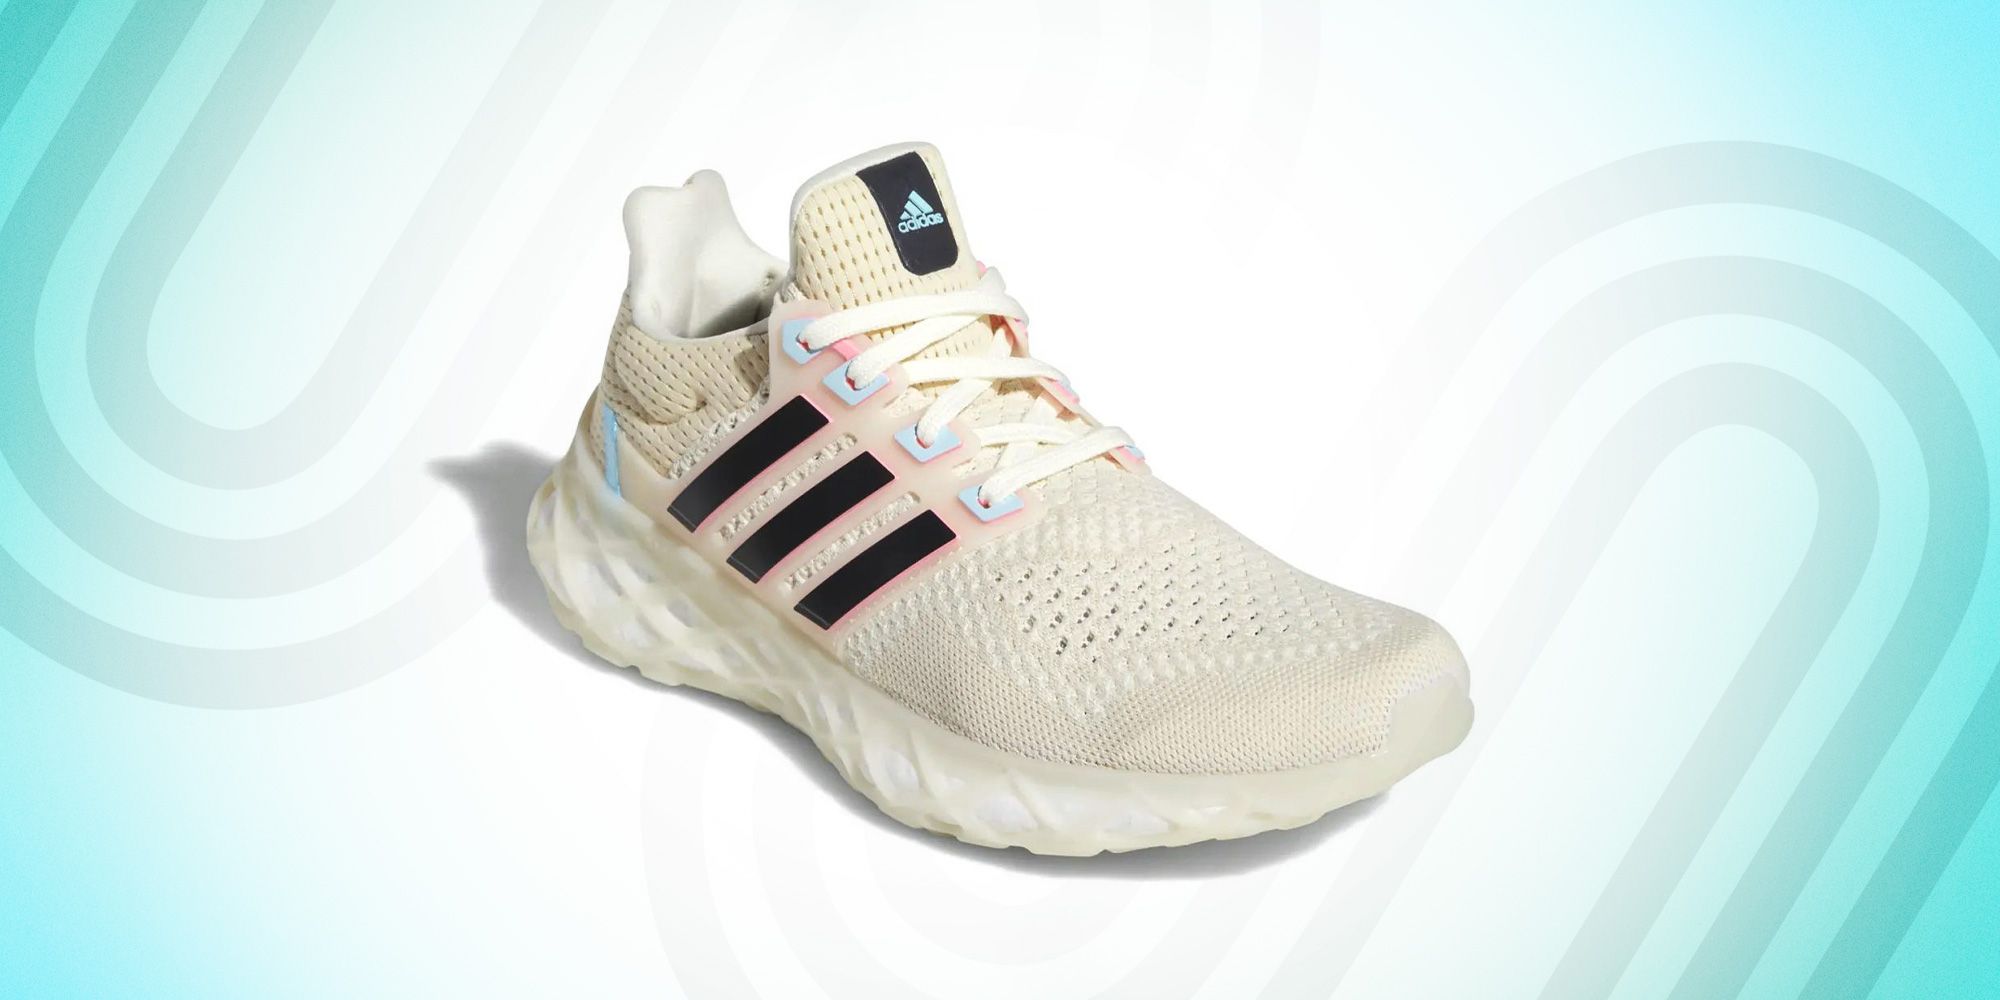 New and Reviewed: Adidas Ultraboost 22 - Women's Running